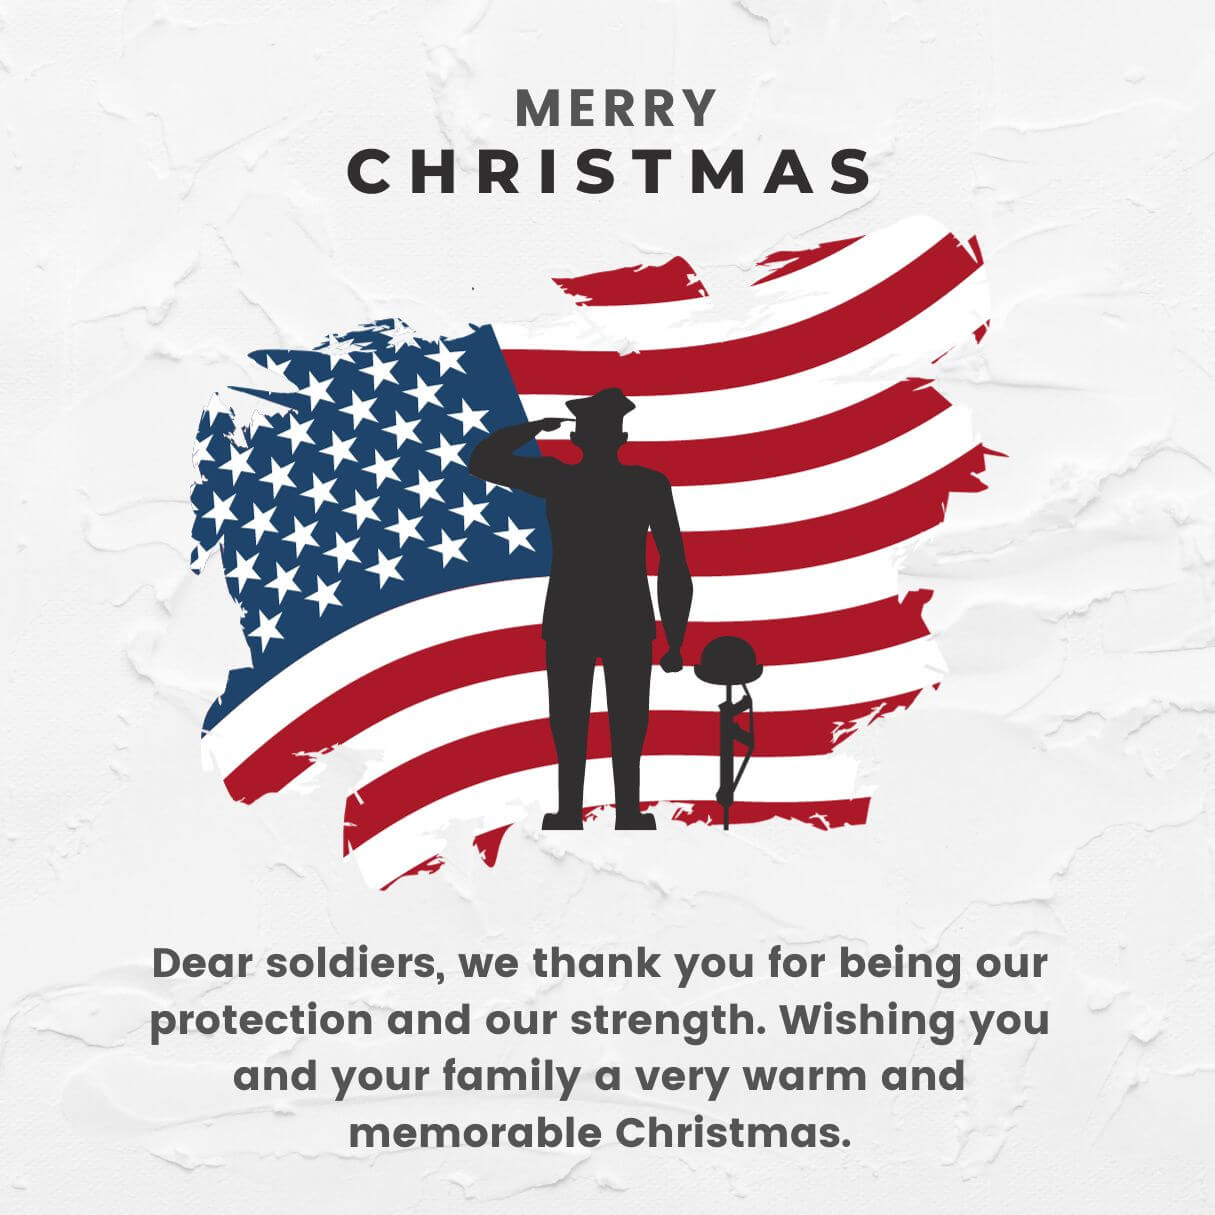 Merry Christmas Messages For Deployed Soldiers And Troops